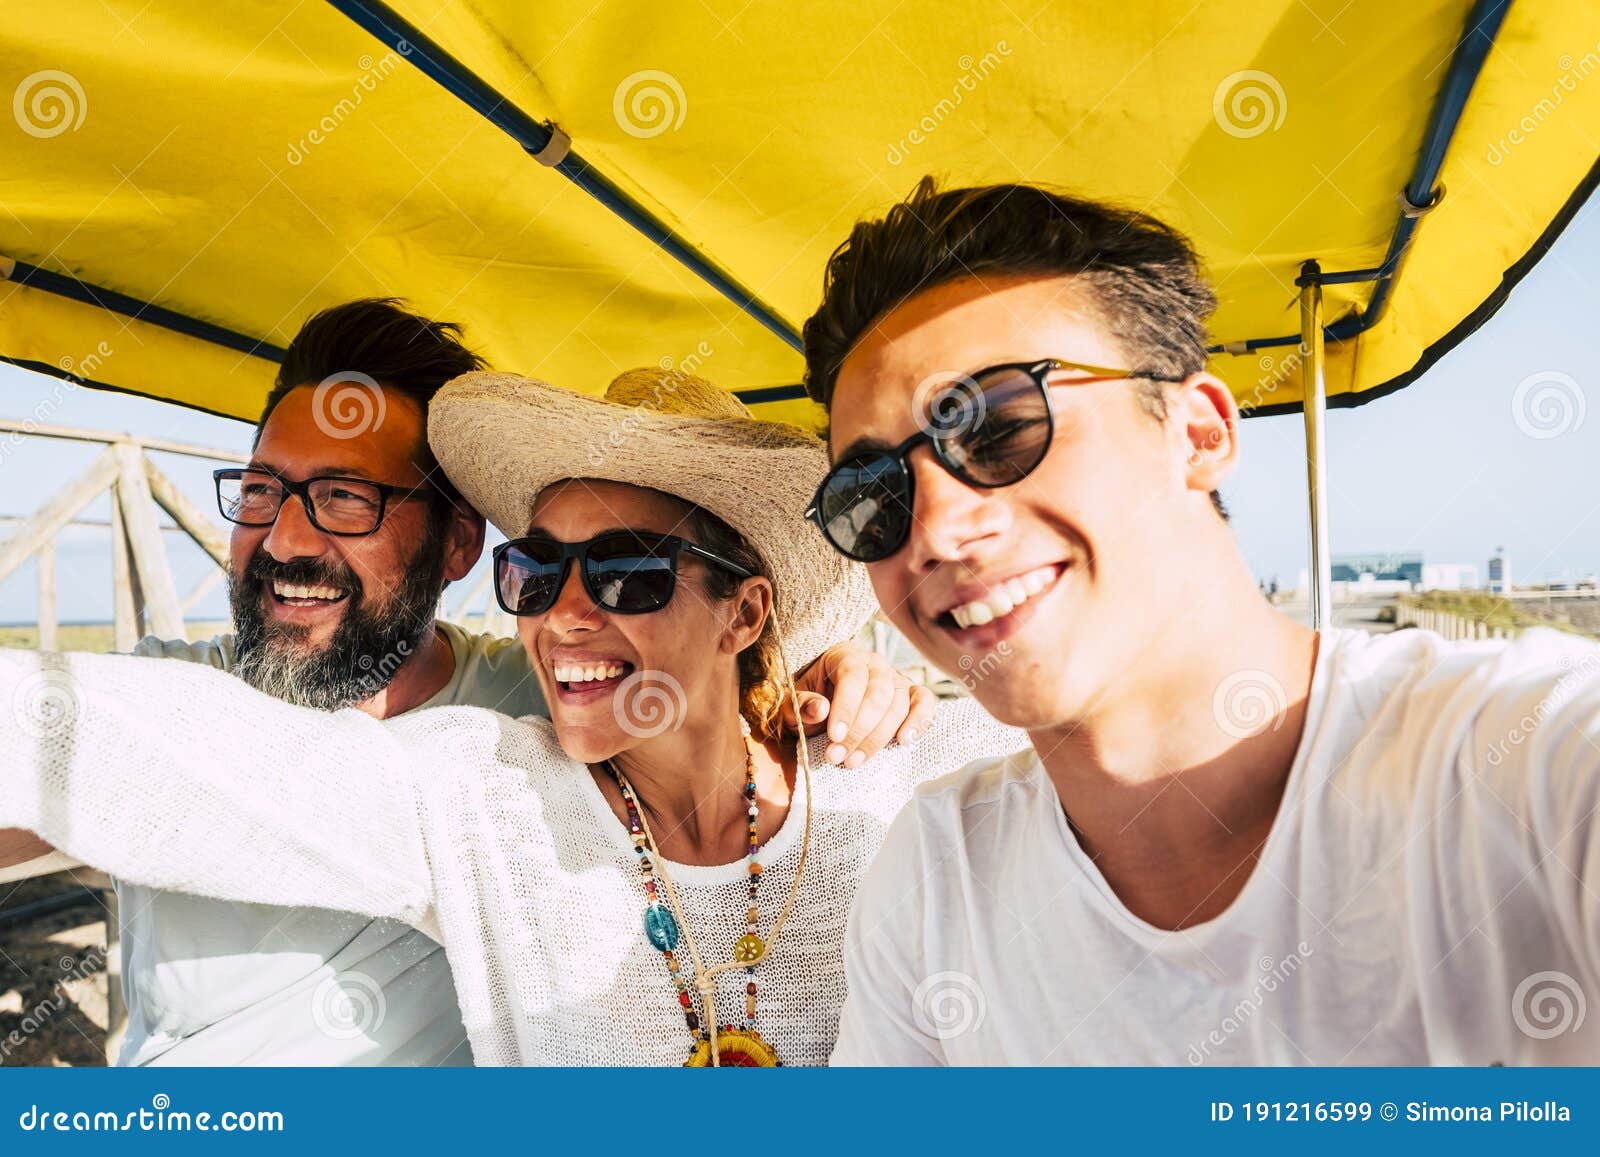 cheerful happy family have fun together in outdoor leisure activity laughing and smiling - concep tof summer holiday vacation for